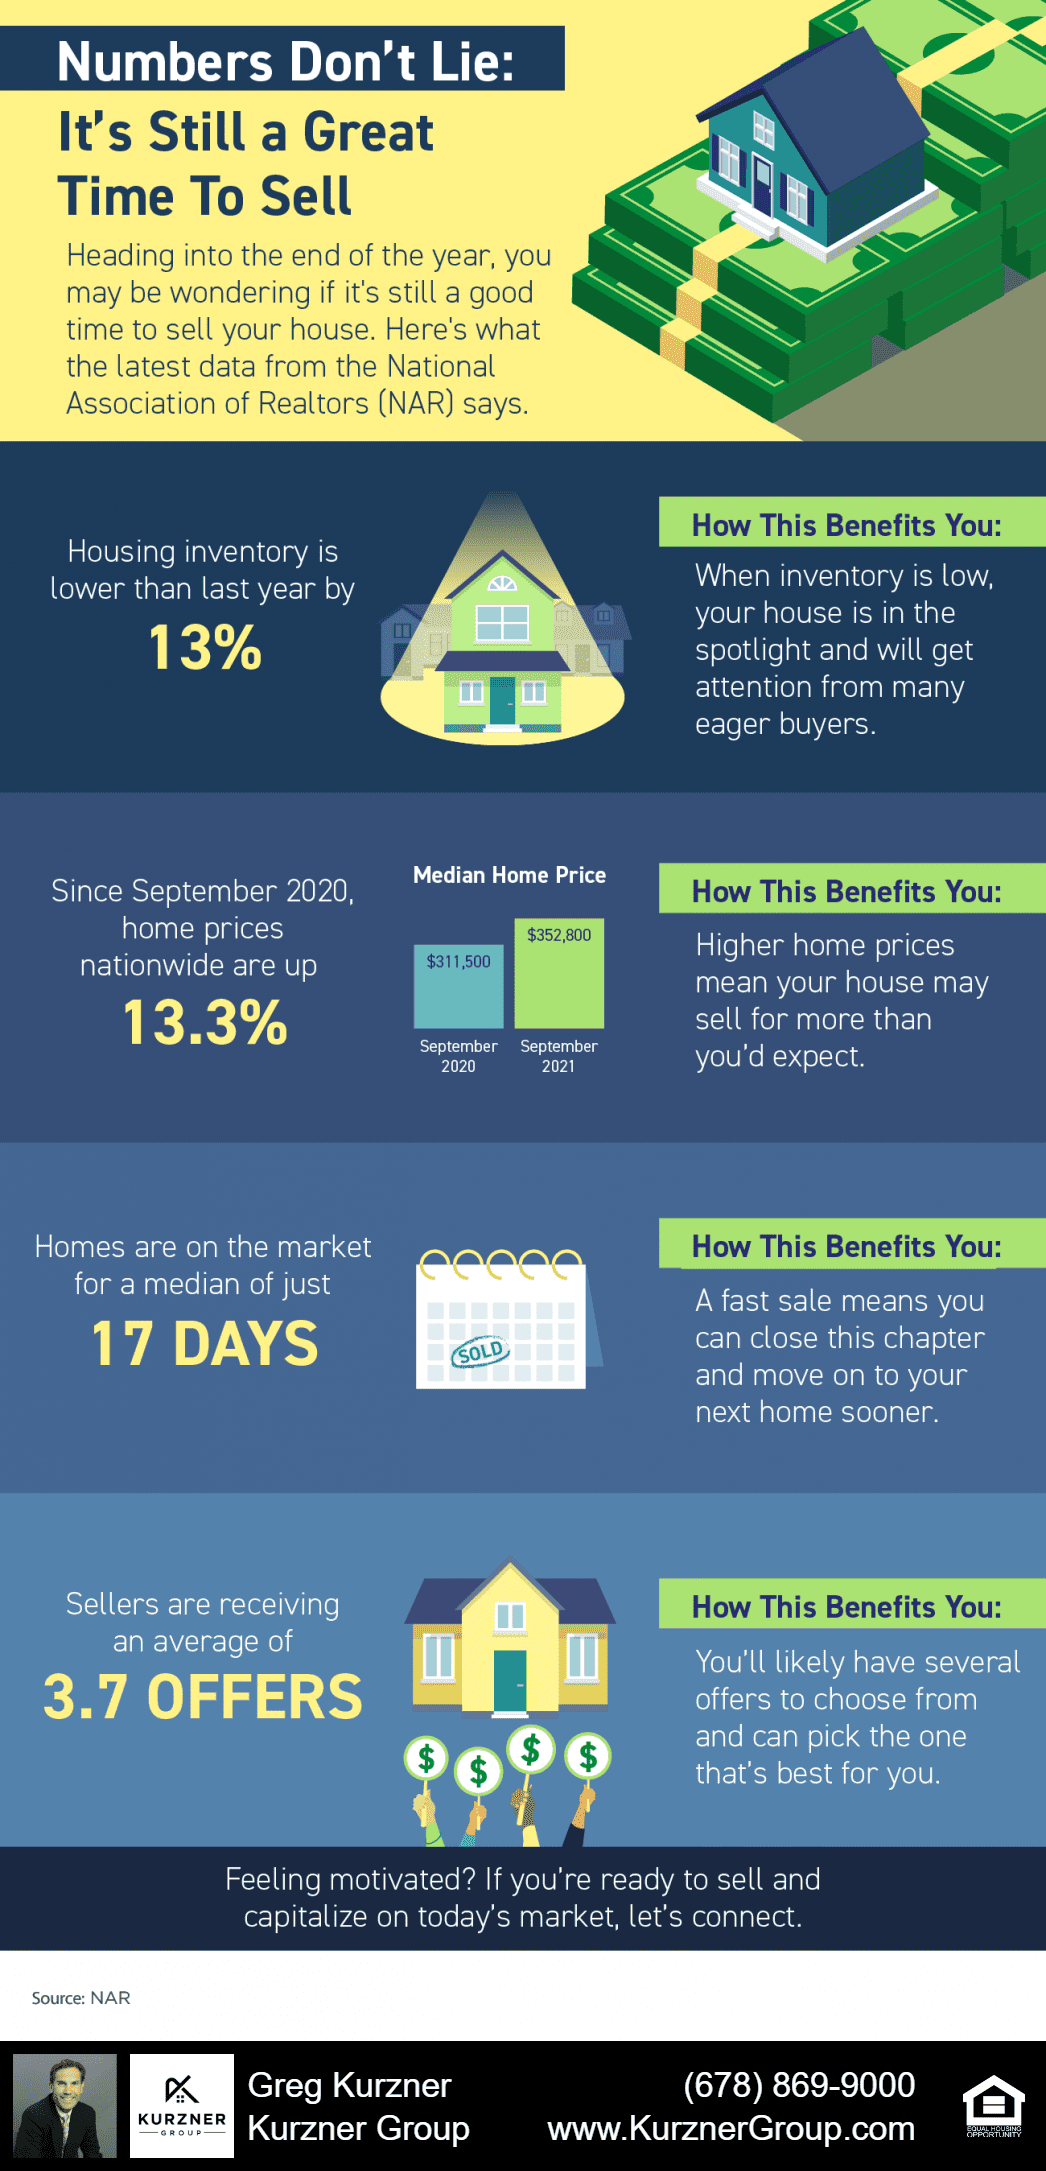 Numbers Don’t Lie – It’s Still a Great Time To Sell [INFOGRAPHIC]